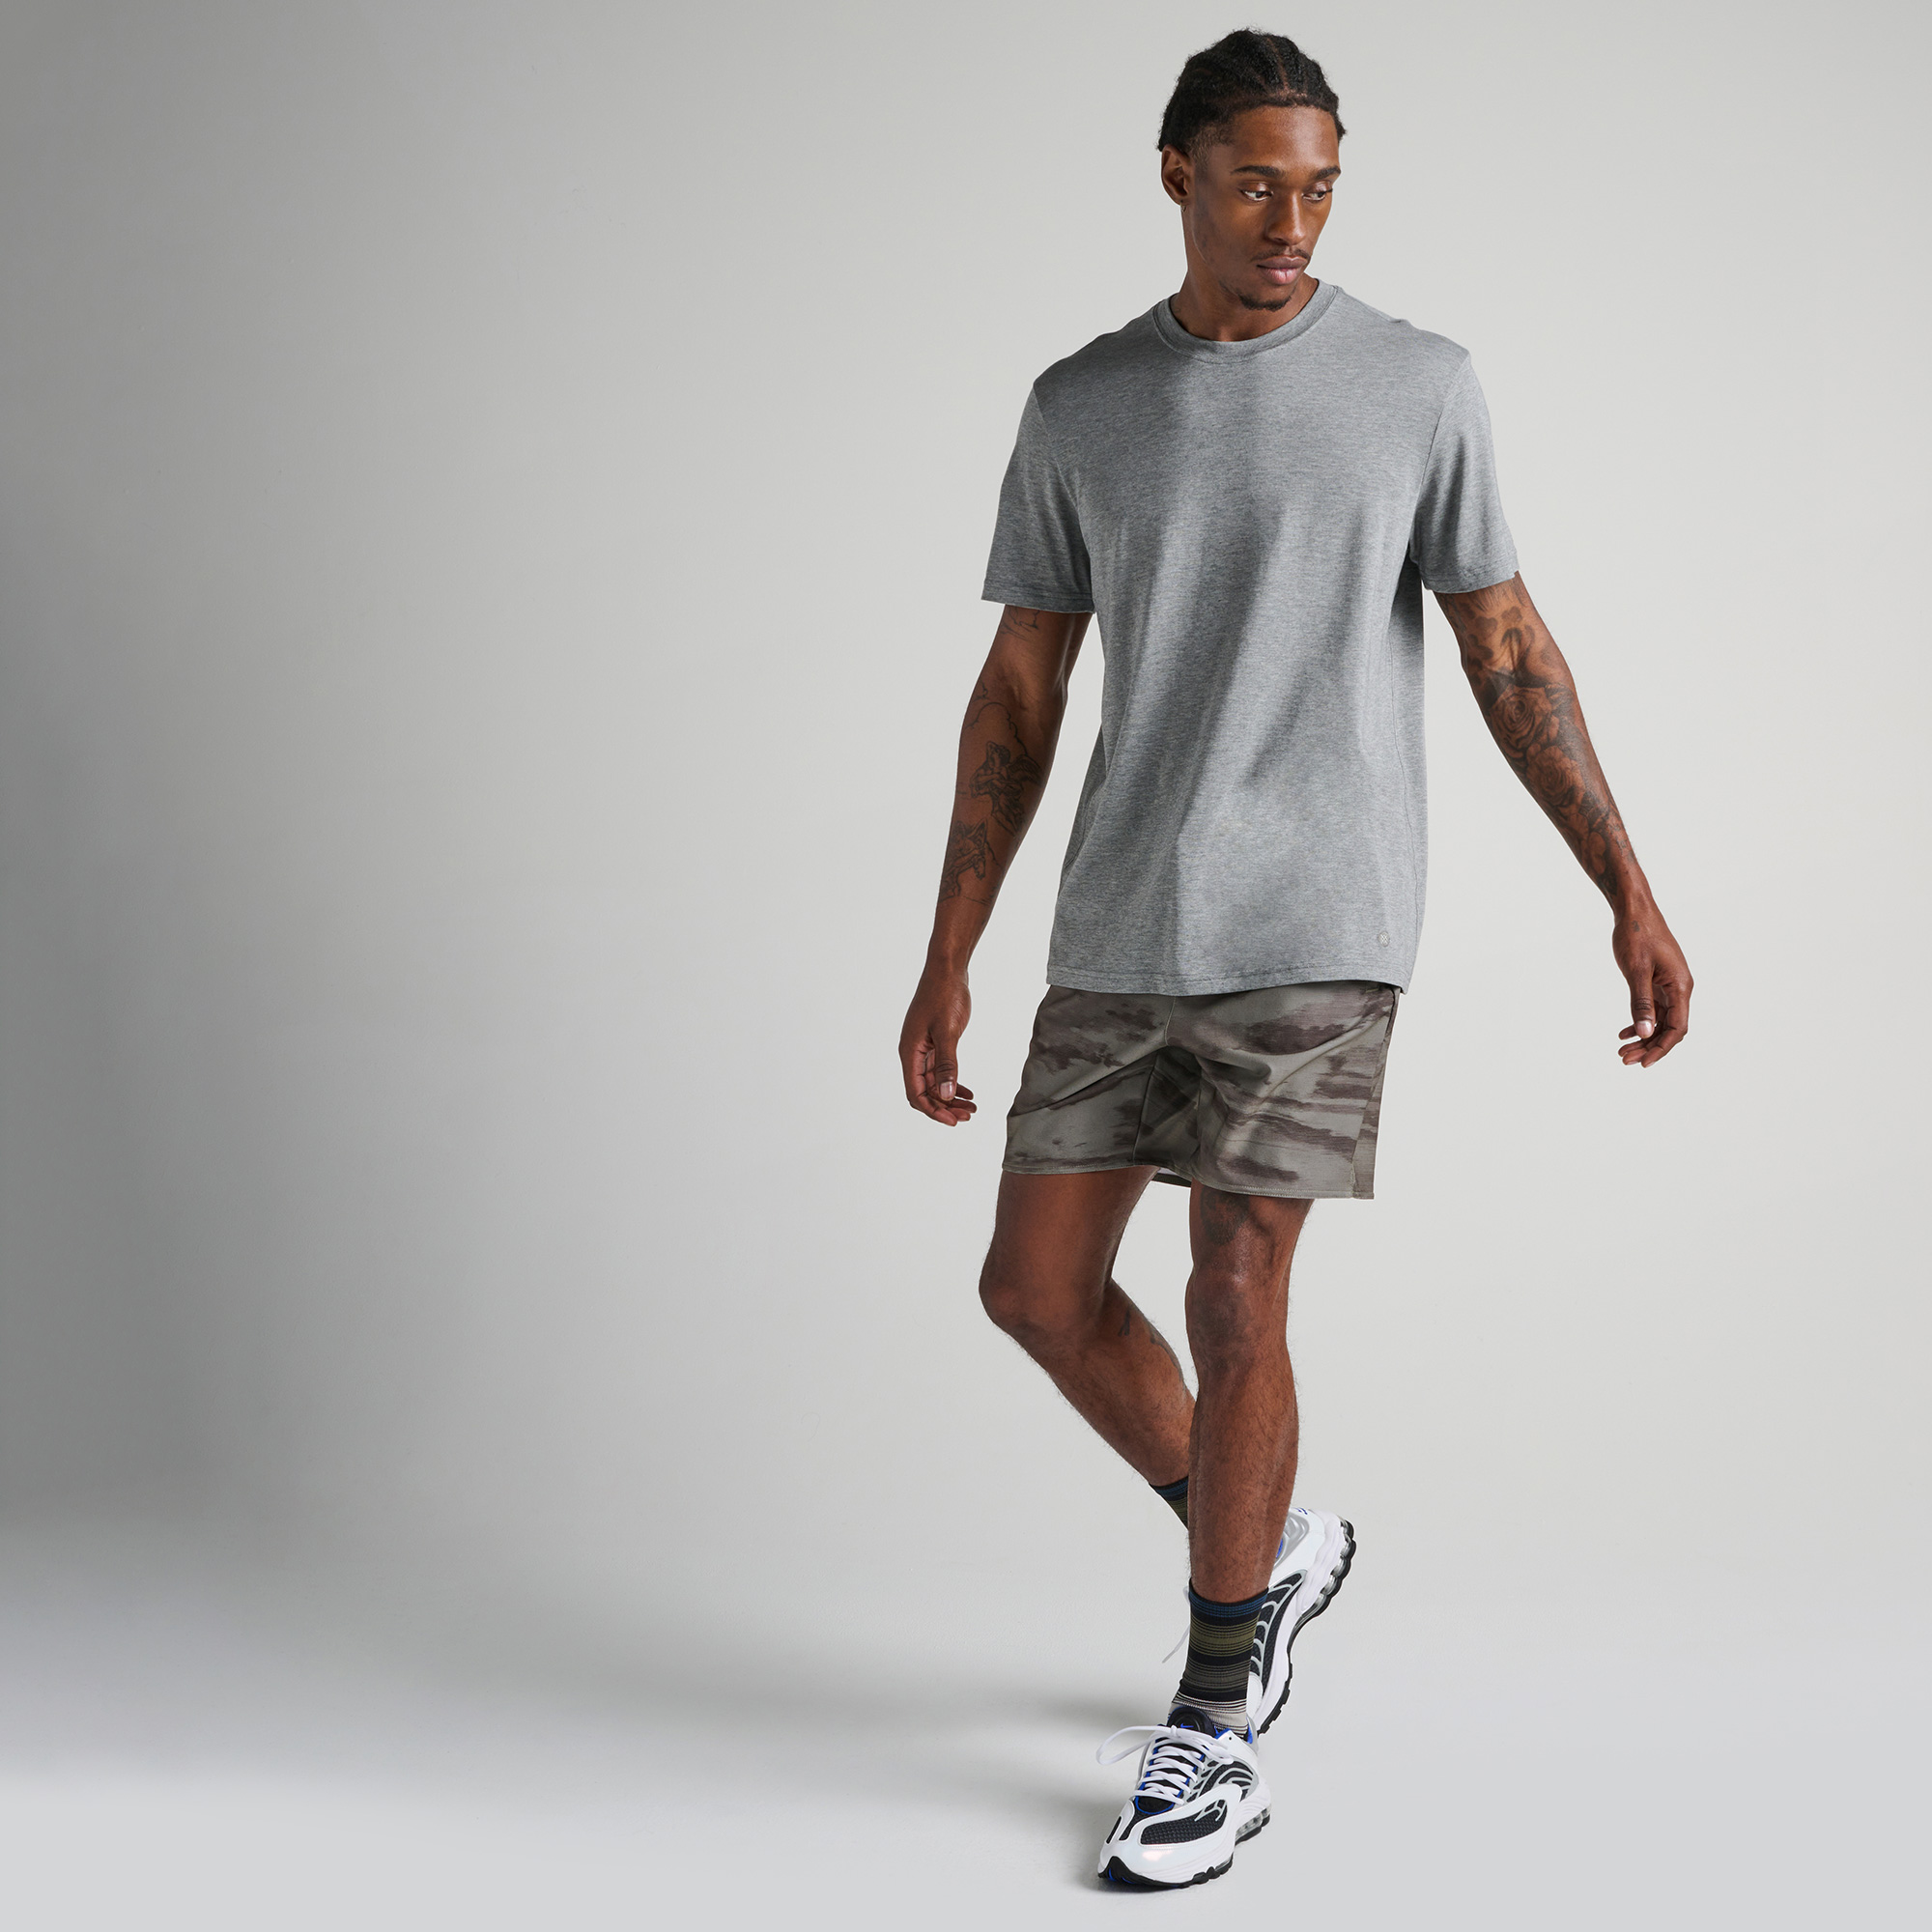 Complex Athletic | Stance